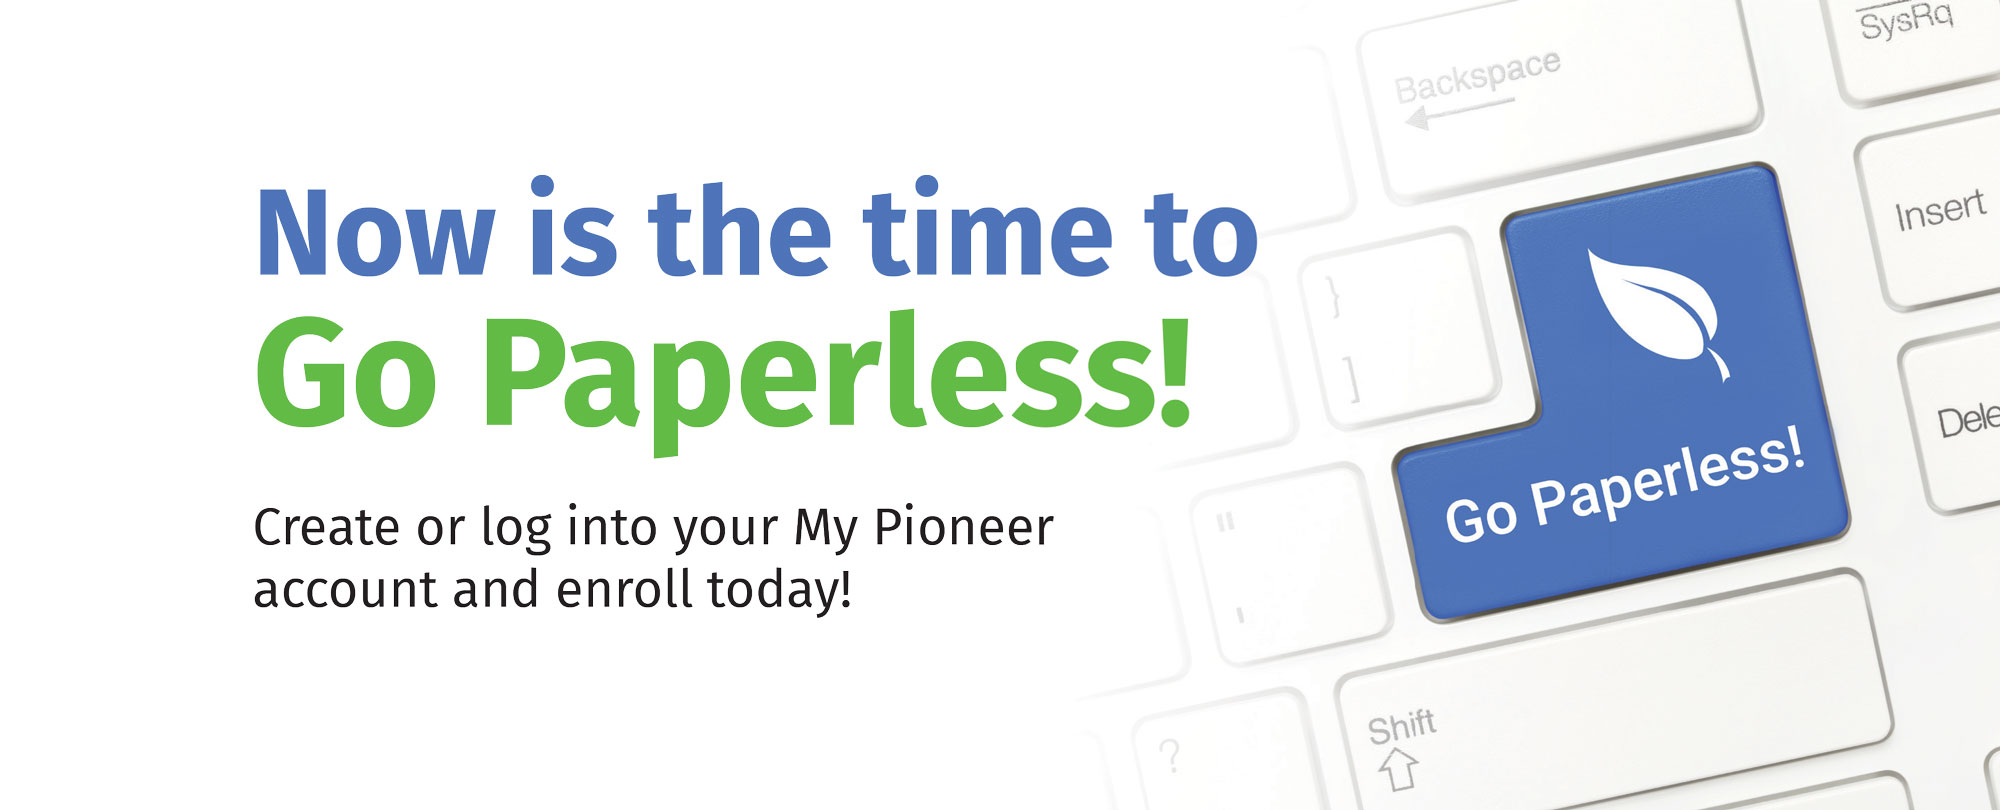 Now is the time to go paperless. Click here to learn more.